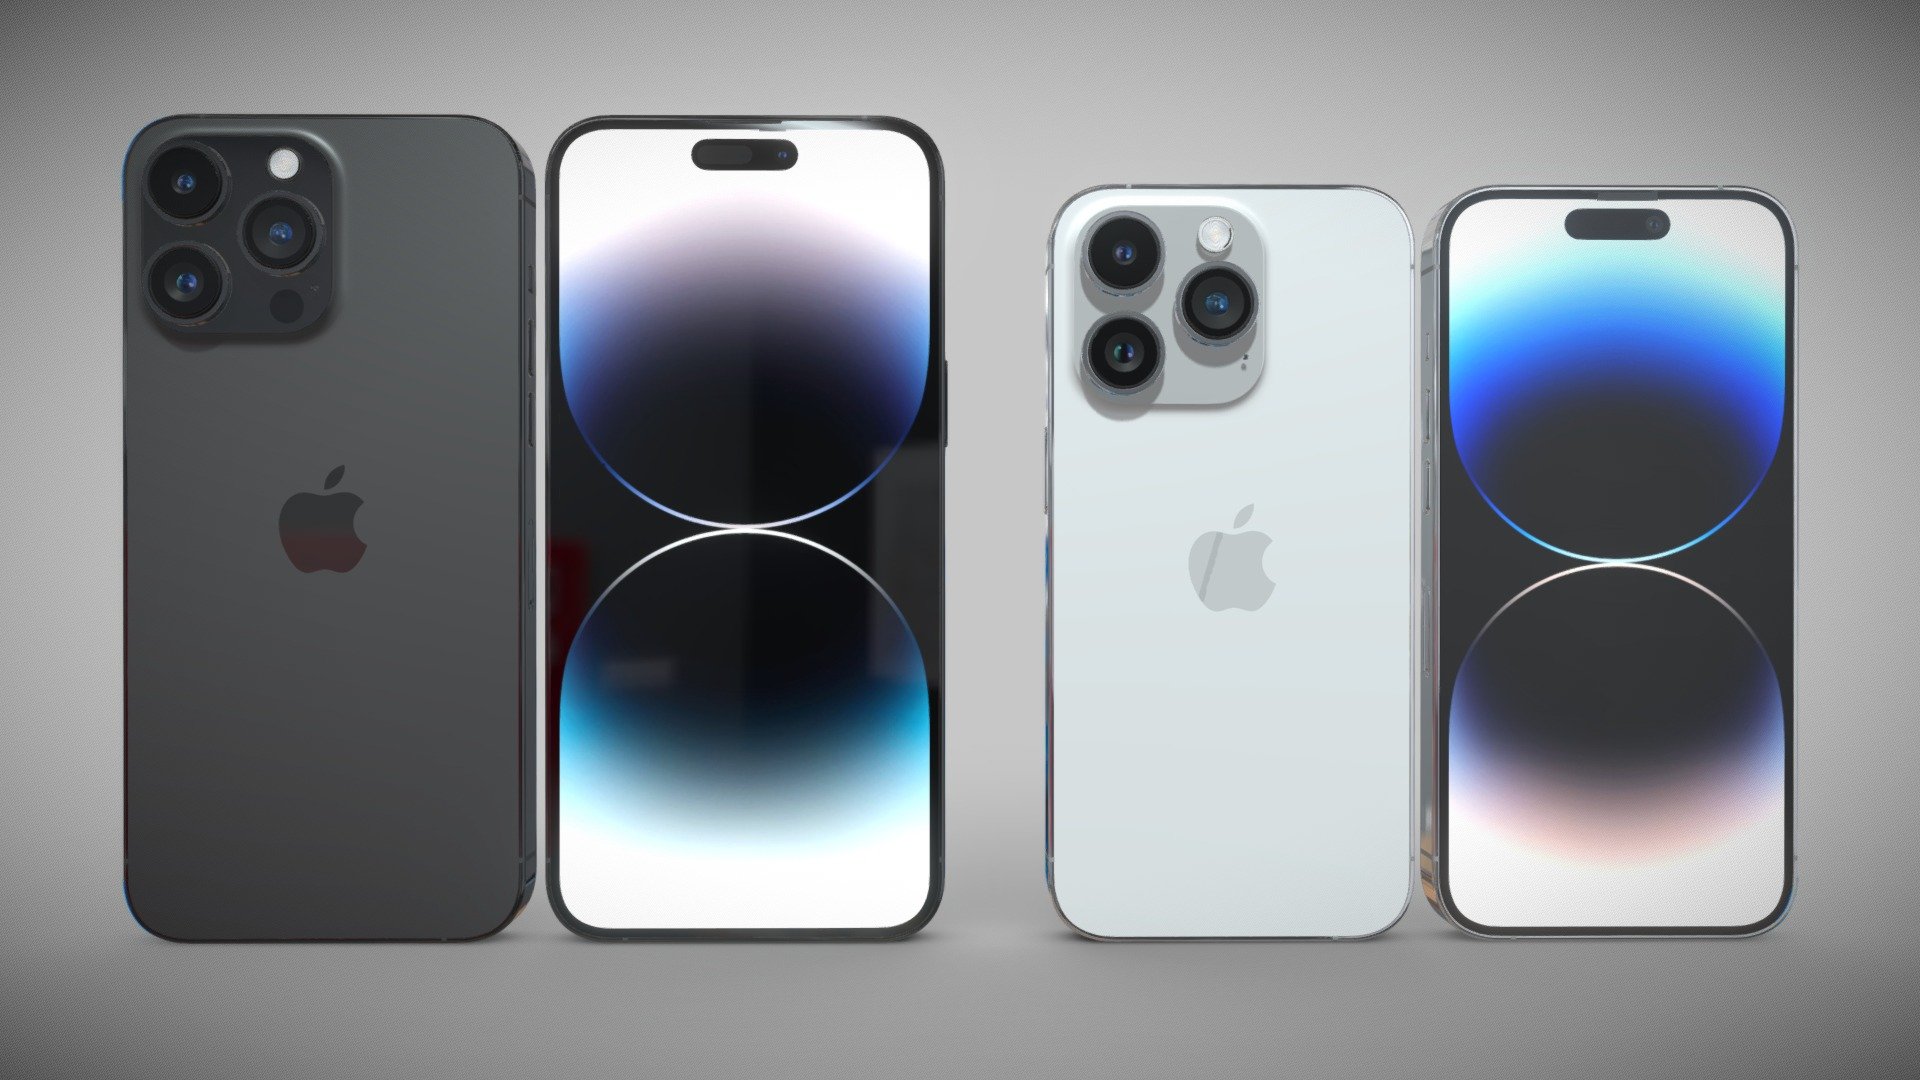 Realistic (copy) 3d model Apple iPhone 14 Pro and 14 Pro MAX.

This set:


2 file obj standard
2 file 3ds Max 2013 vray material
2 file 3ds Max 2013 corona material
2 file of 3Ds
2 file e3d full set of materials.
2 file cinema 4d standard.
2 file blender cycles.

Topology of geometry:
- forms and proportions of The 3D model
- the geometry of the model was created very neatly
- there are no many-sided polygons
- detailed enough for close-up renders
- the model optimized for turbosmooth modifier
- Not collapsed the turbosmooth modified
- apply the Smooth modifier with a parameter to get the desired level of detail

Organization of scene:
- to all objects and materials
- real world size (system units - mm)
- coordinates of location of the model in space (x0, y0, z0)
- does not contain extraneous or hidden objects (lights, cameras, shapes etc.) - Apple iPhone 14 Pro and 14 Pro MAX - Buy Royalty Free 3D model by madMIX 3d model